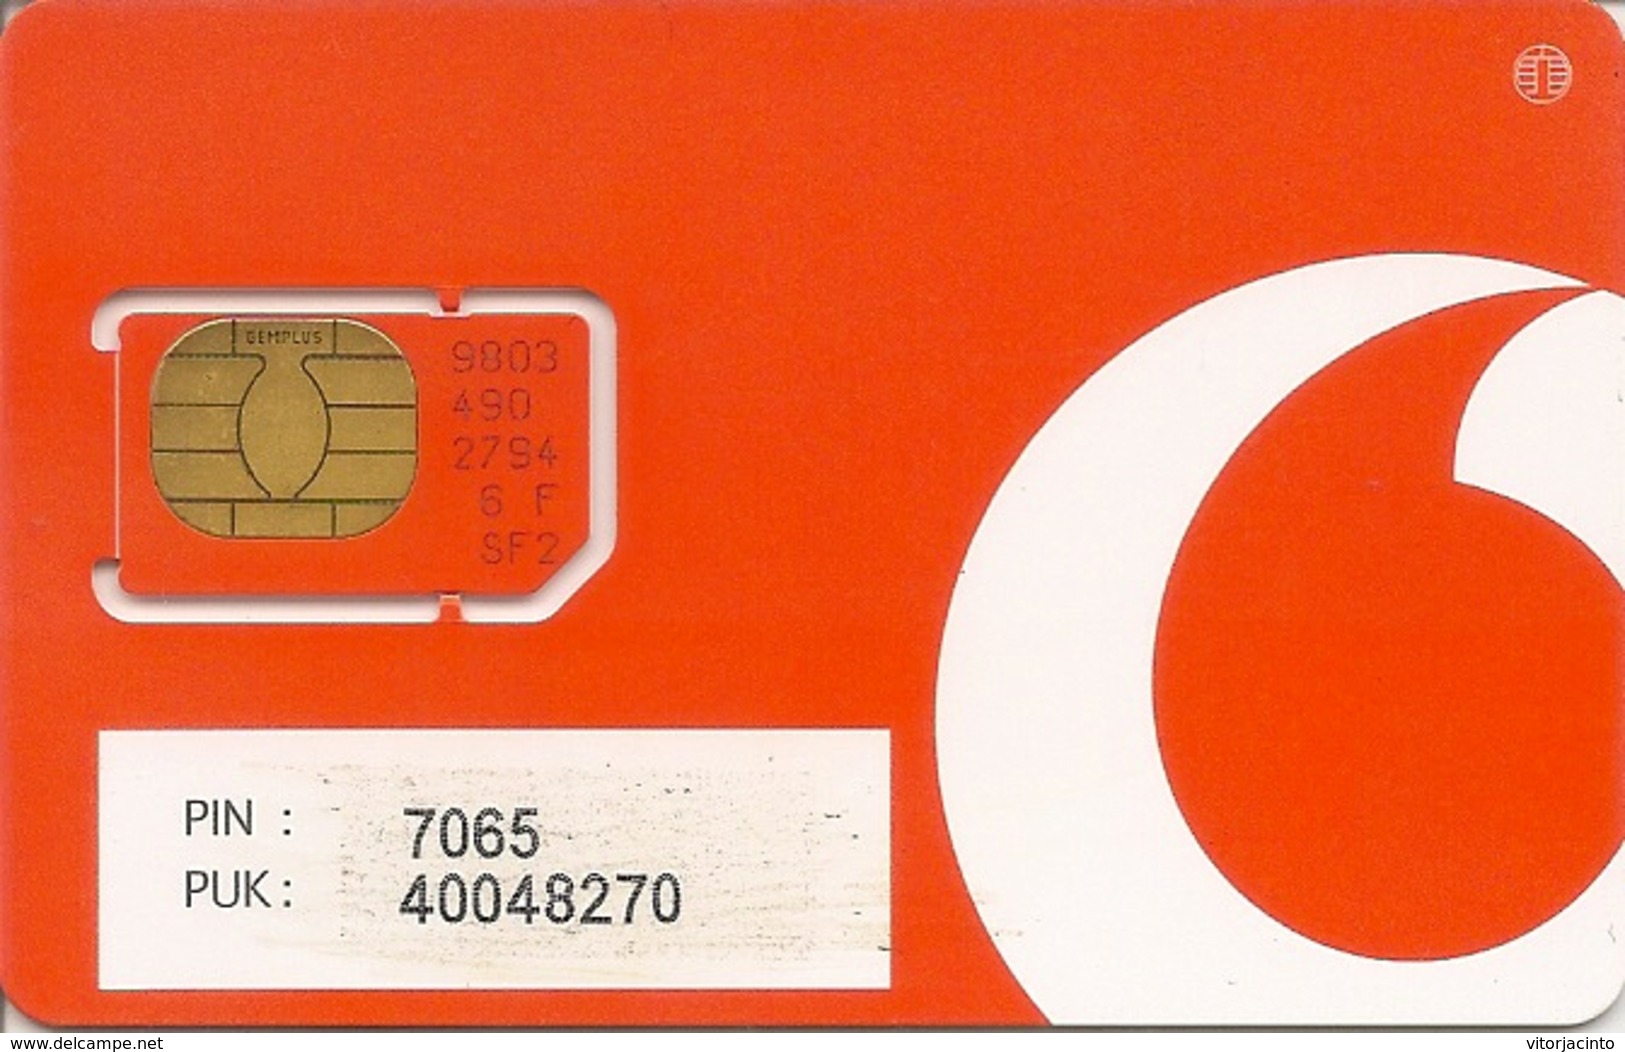 Mobile Phonecard Vodafone - GEMPLUS1-1 - Portugal (NOT USED) - Portugal